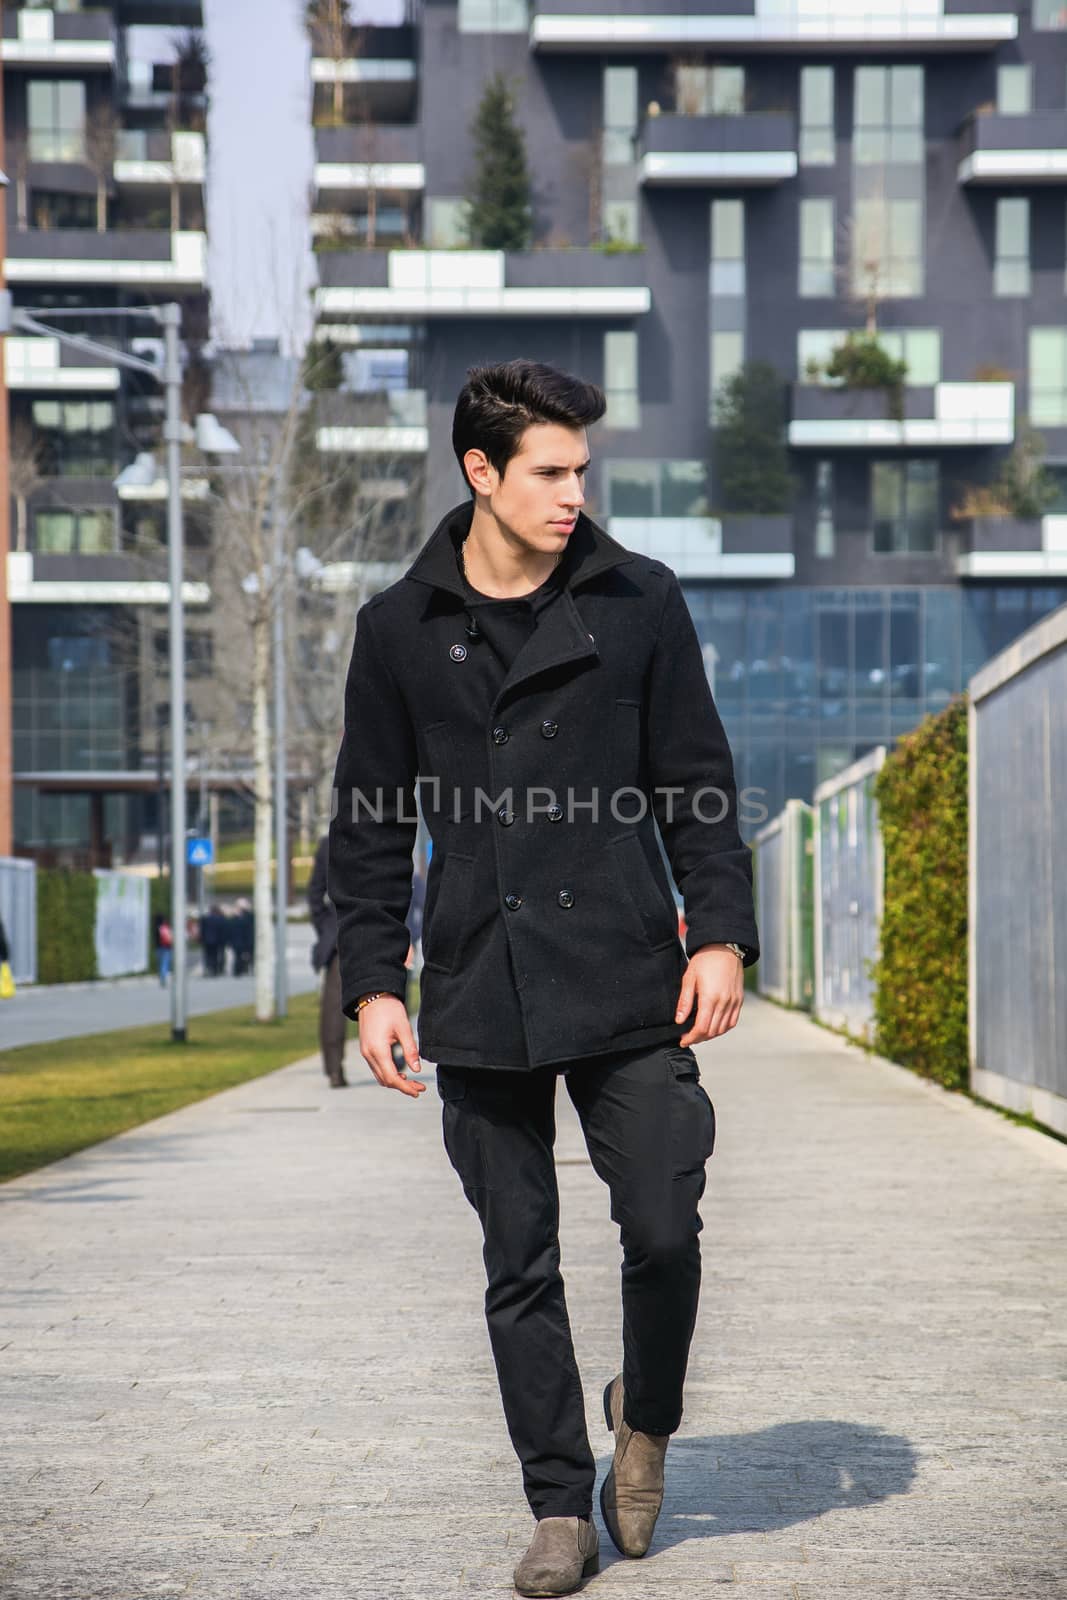 Stylish Young Handsome Man in Black Coat Standing in City Center Street with Skyscraper Behind Him, Looking to the Right